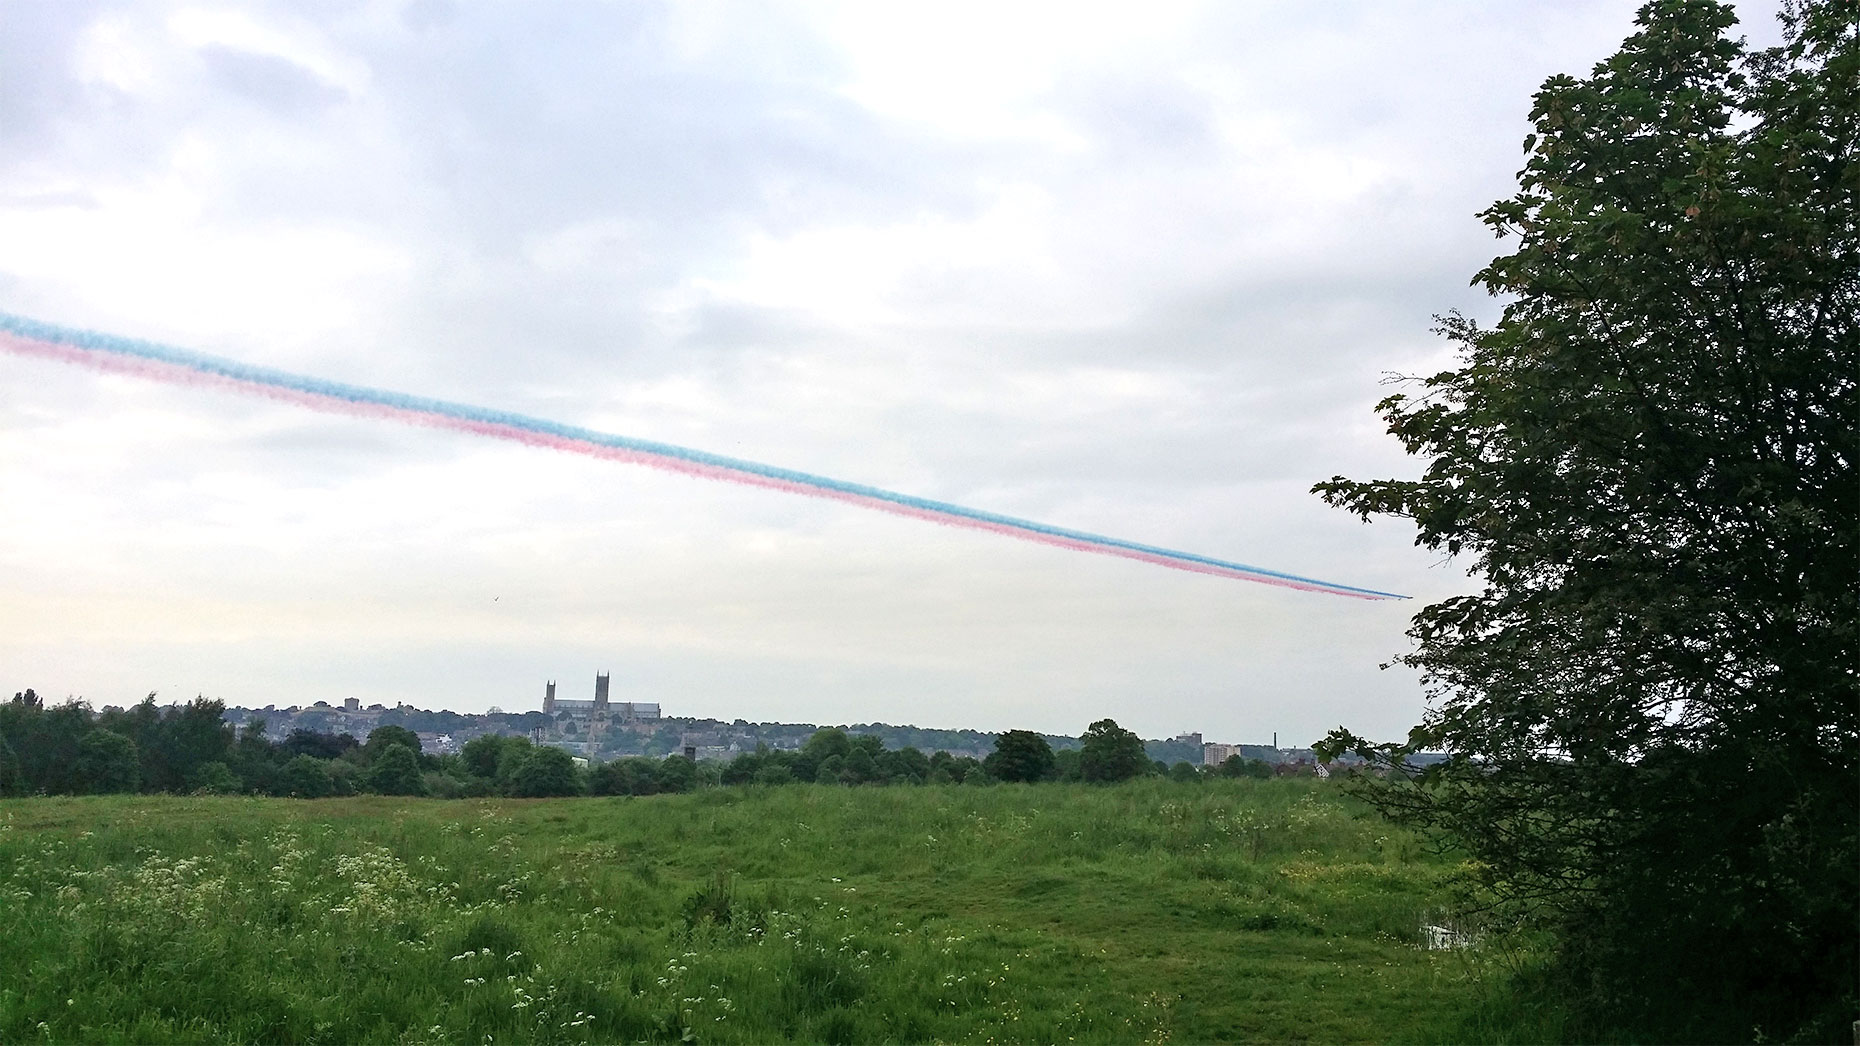 The Red Arrows' surprise flypast over Lincoln seen from South Park. Photo: Piotr Bienko